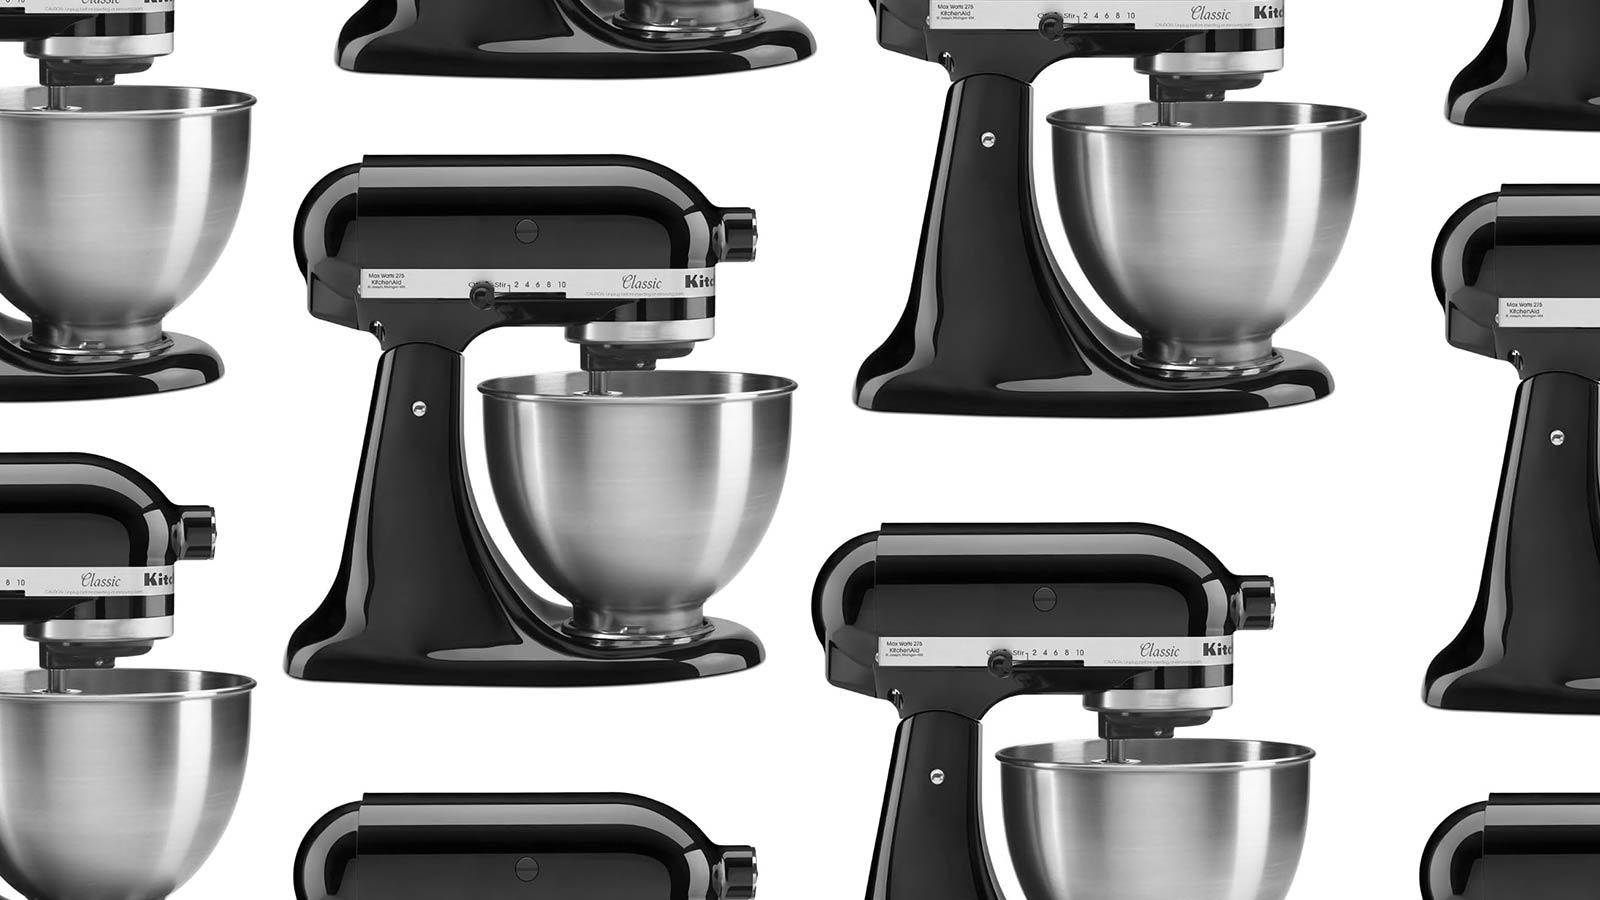 A pattern made of Kitchen-Aid stand mixers in profile on a plain background